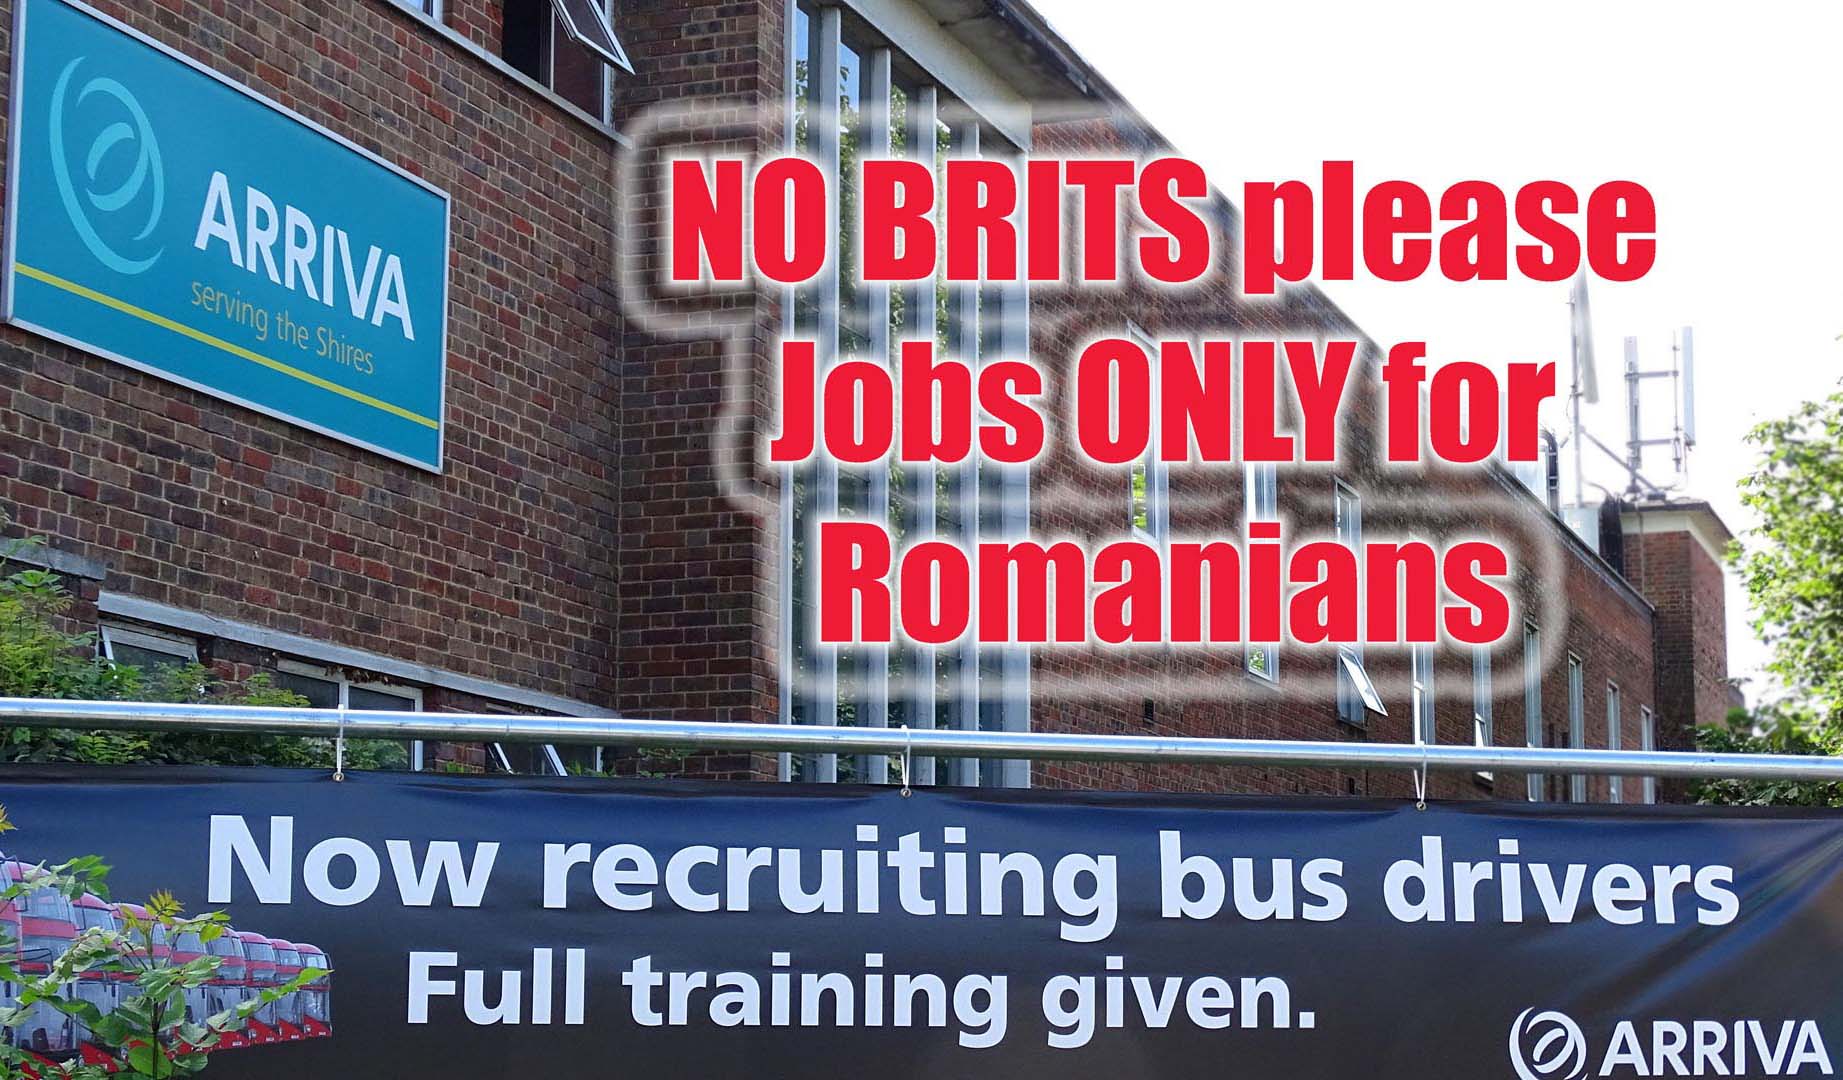 Arriva was looking for 30 drivers to work full time in Watford, with accommodation provided by the company.